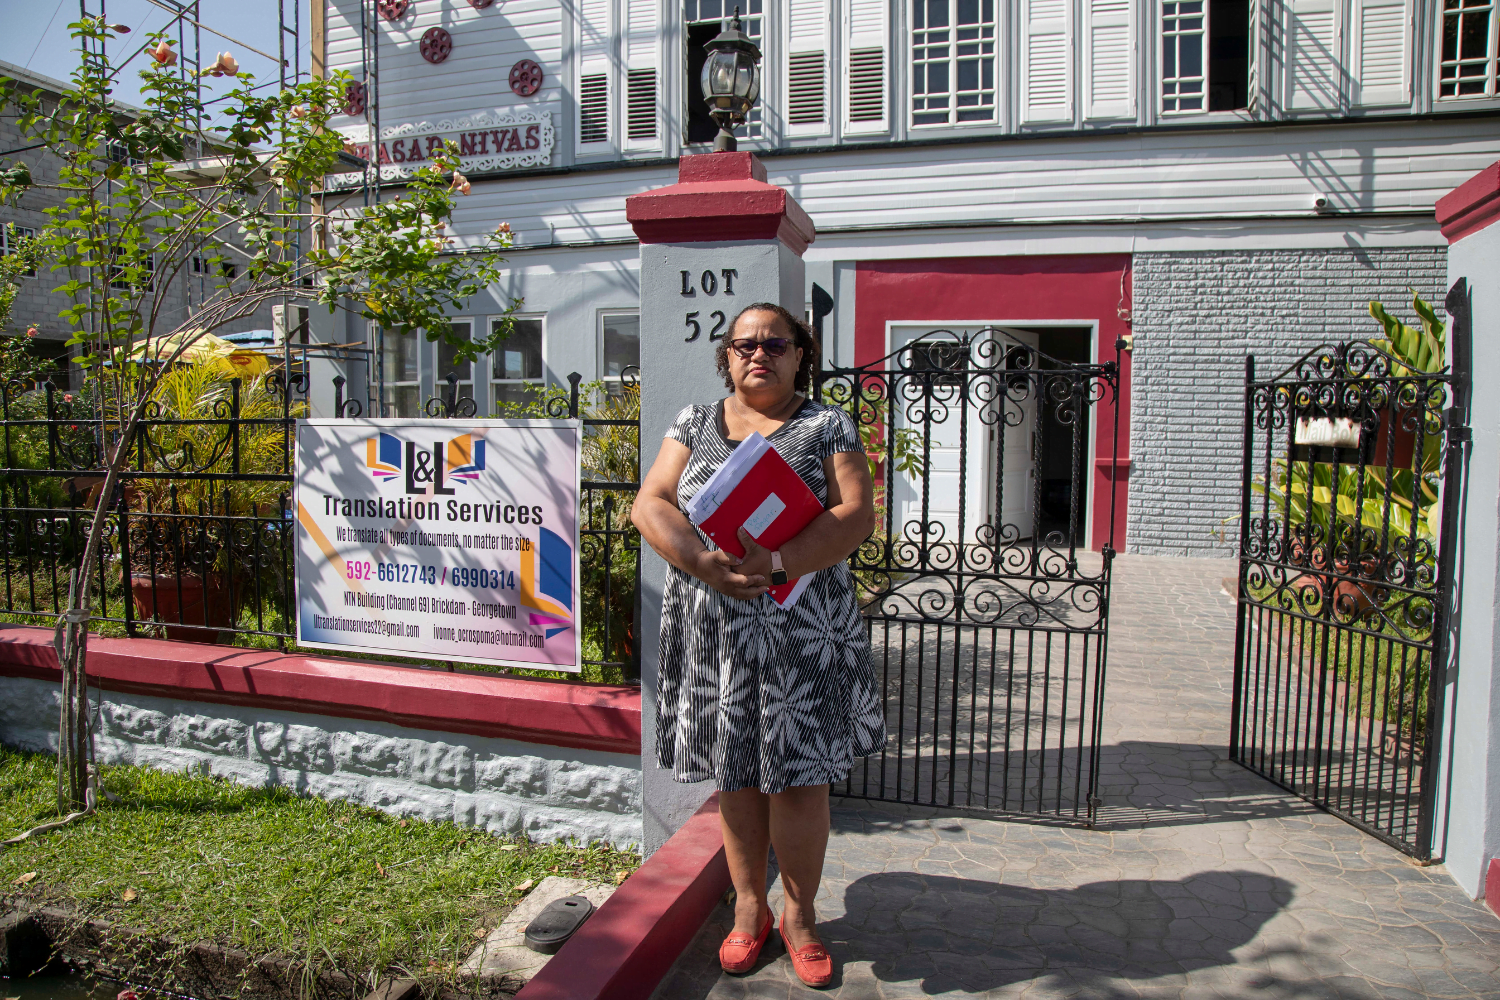 A woman entrepreneur, Ivonne Ocrospoma, stands outside on a sunny day. Behind her is a gated business. On the gate is a sign that says "L&L Translation Services". She is wearing read shoes and a black and white dress with plant patterns all over it. Her hair is tied into a ponytail and she is carrying a red folder that is full of documents.